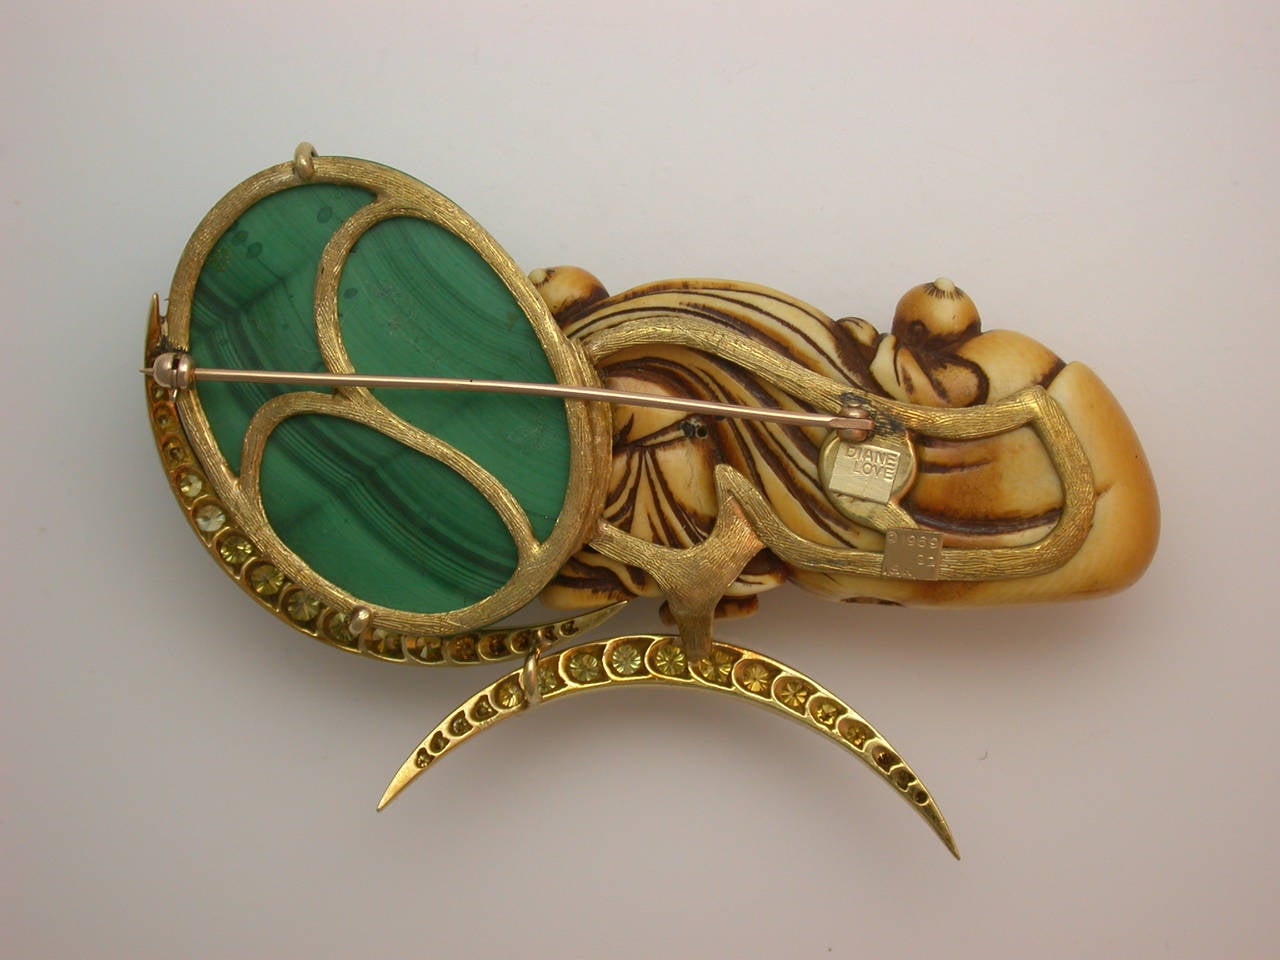 An artistic composition built from disparate elements which work beautifully together, the large pin centering an antique Japanese netsuke, aged to a soft honey yellow, its carved drapery mirrored cleverly by the banding in the bright malachite